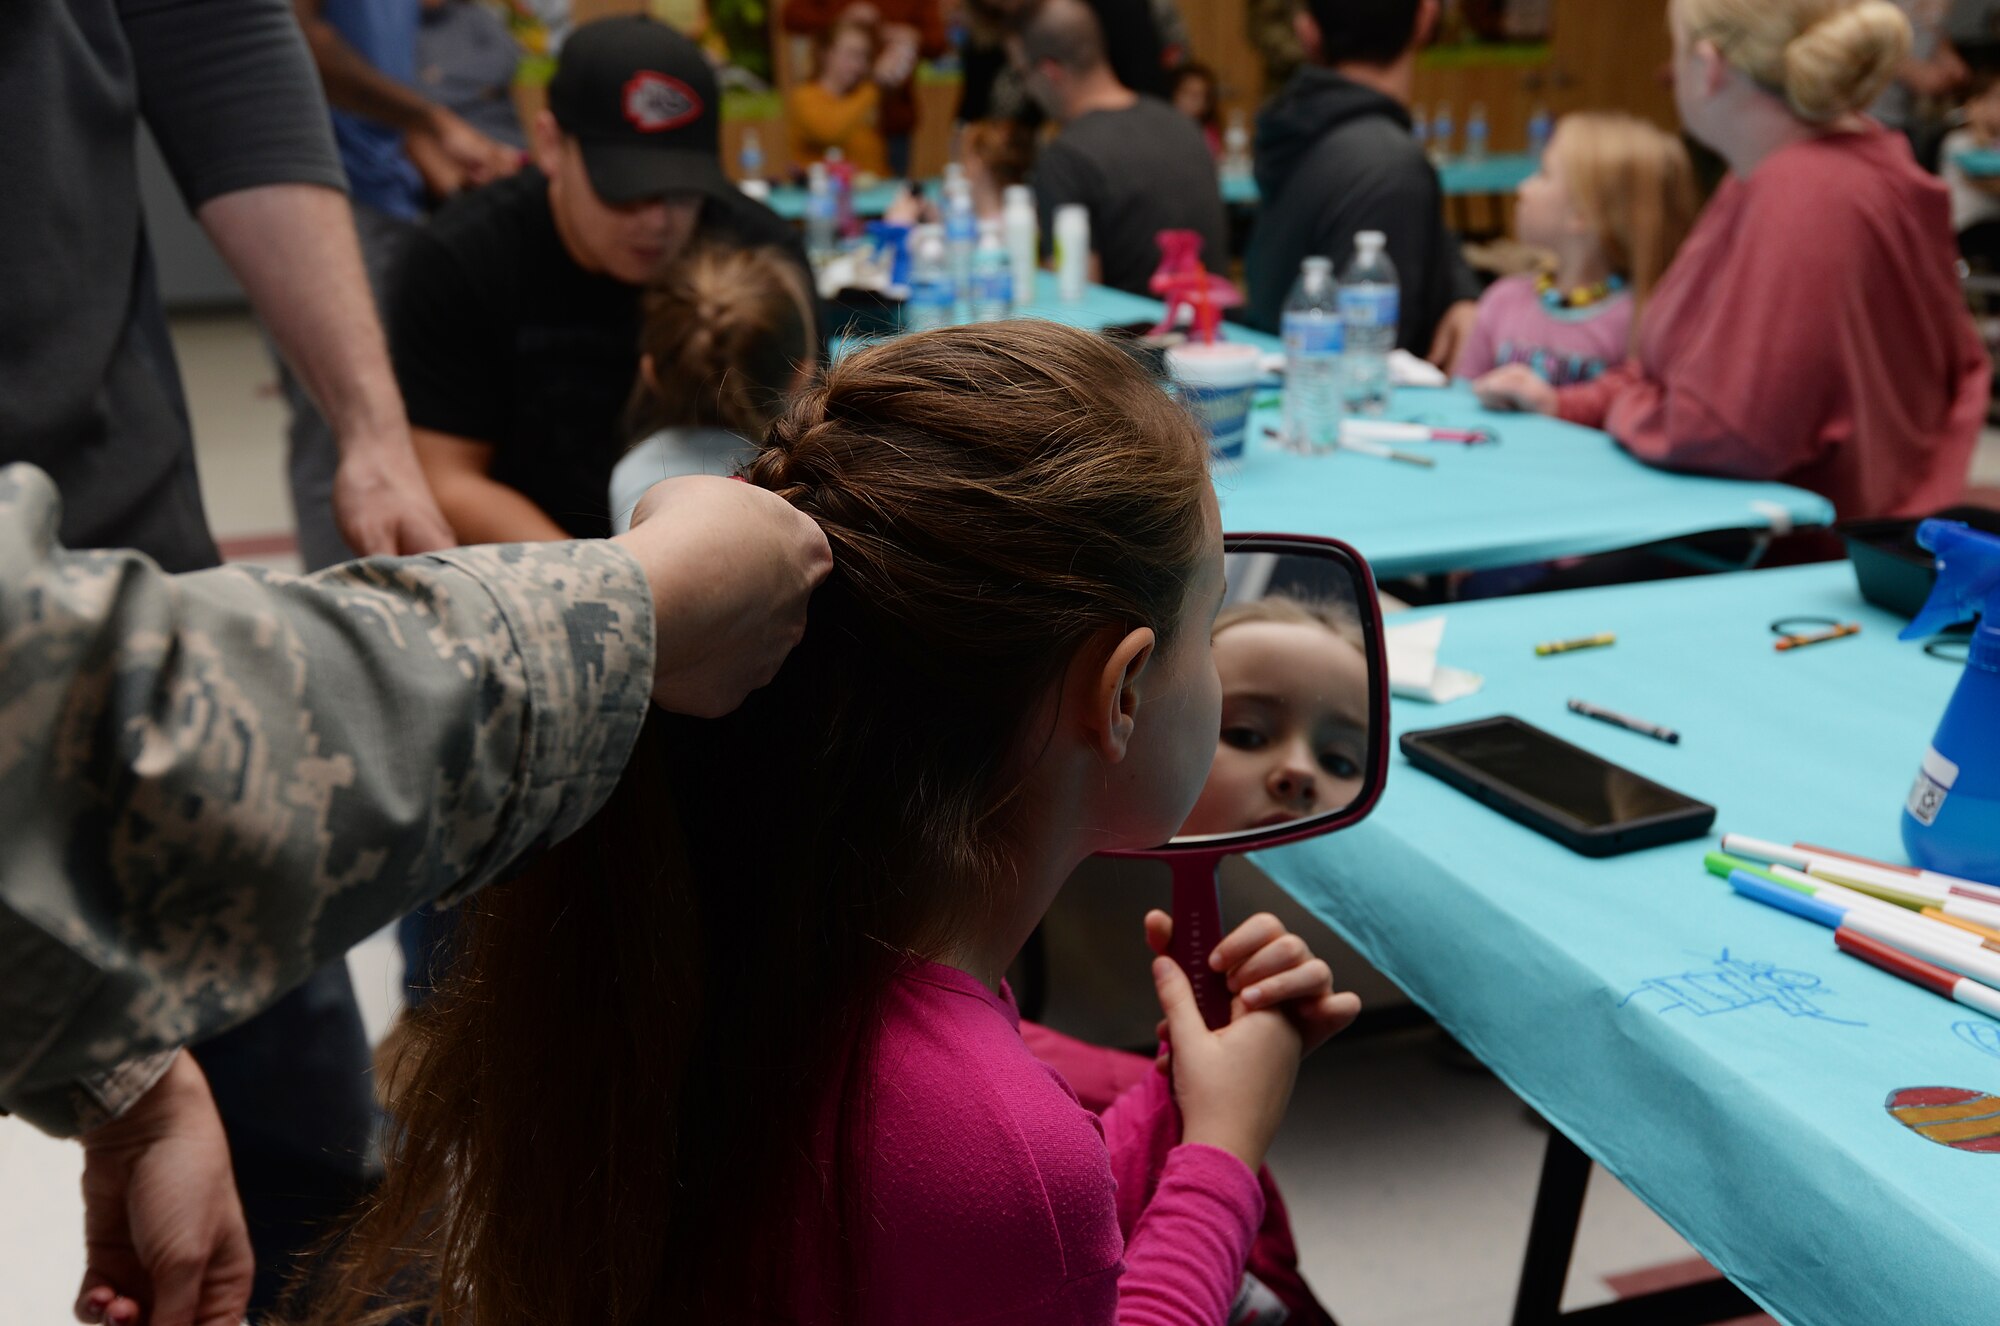 Willow Brewer looks in the mirror during the first Braids to Buns event at Whiteman Air Force Base.